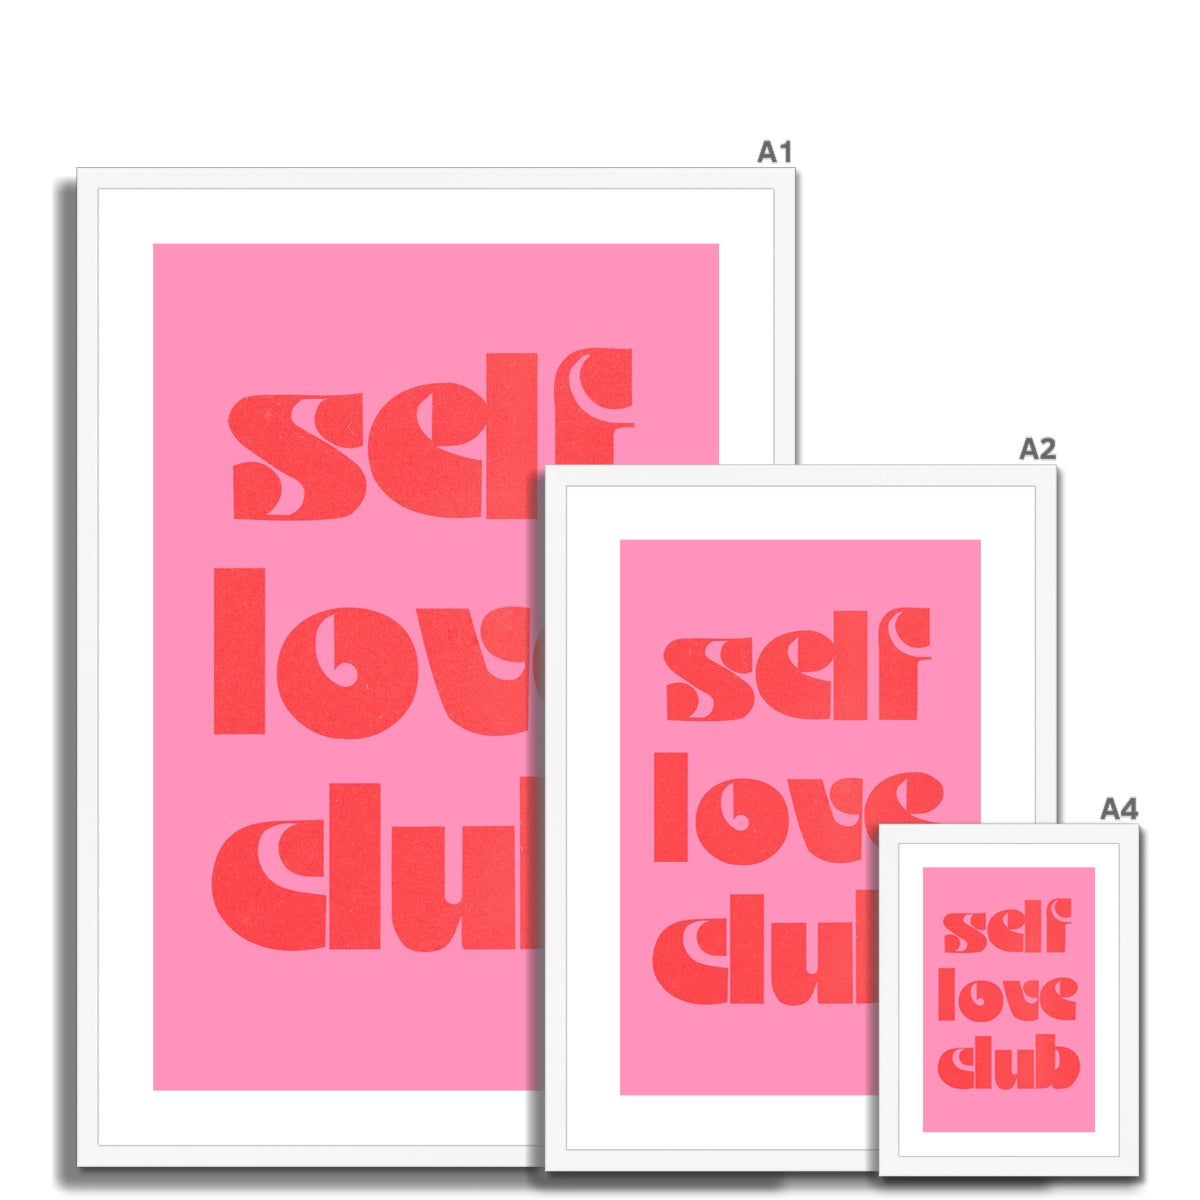 © les muses / Cool vintage typography art prints drawing from 90s grunge, girly Y2K and groovy 70s aesthetics. Retro style wall art and funky posters for trendy apartment or dorm decor with a killer aesthetic.

